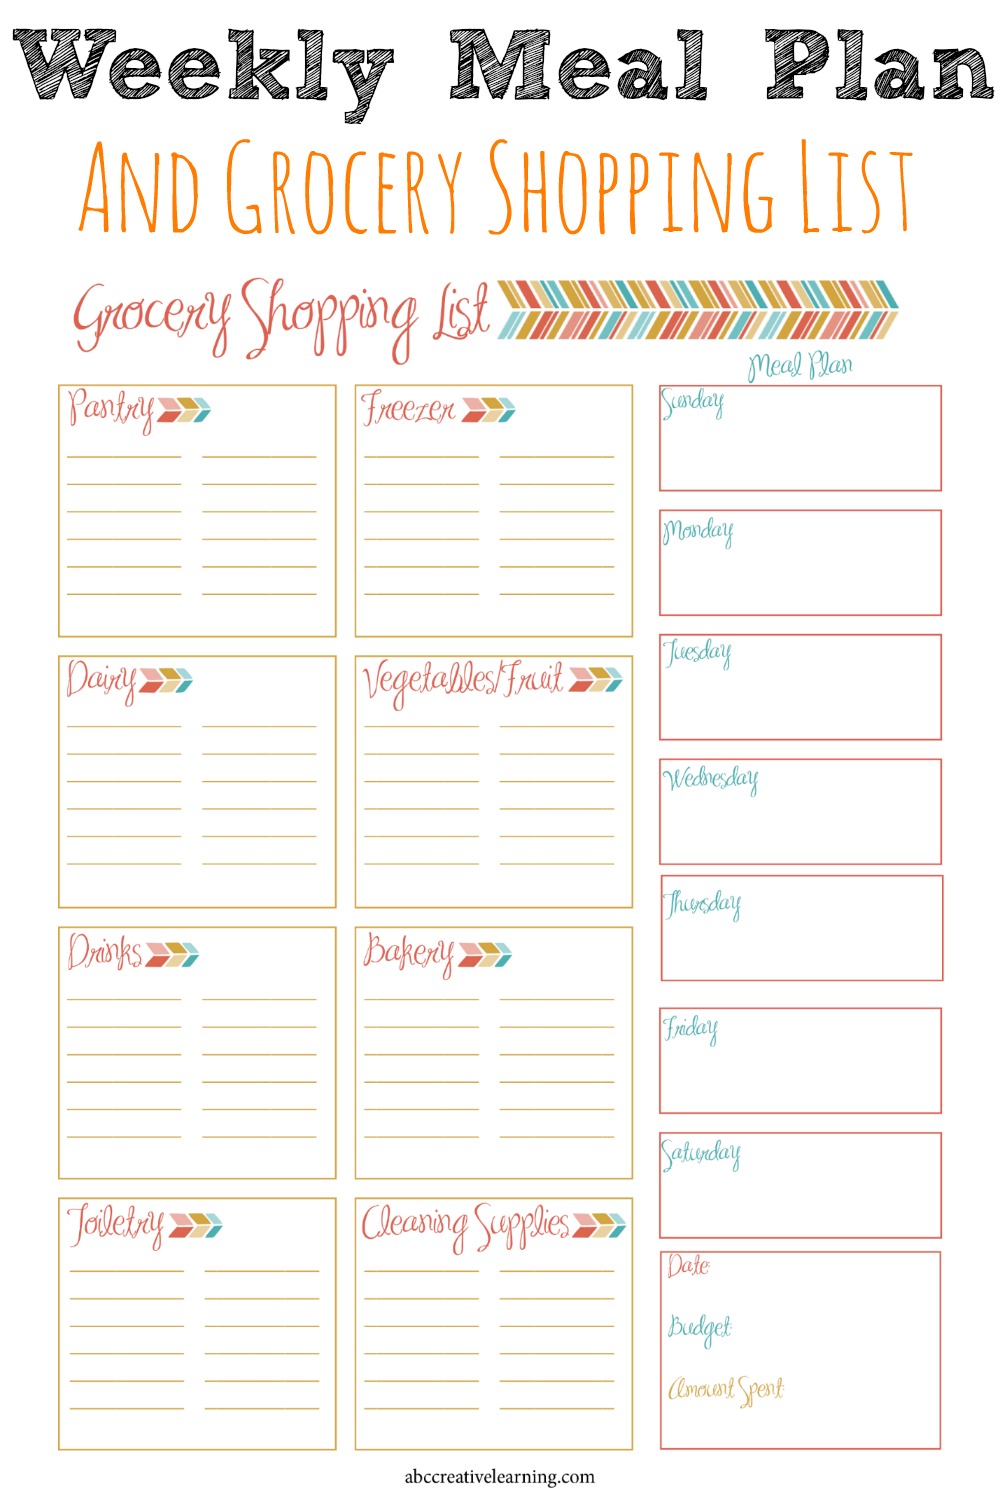 grocery shopping list with meal plan